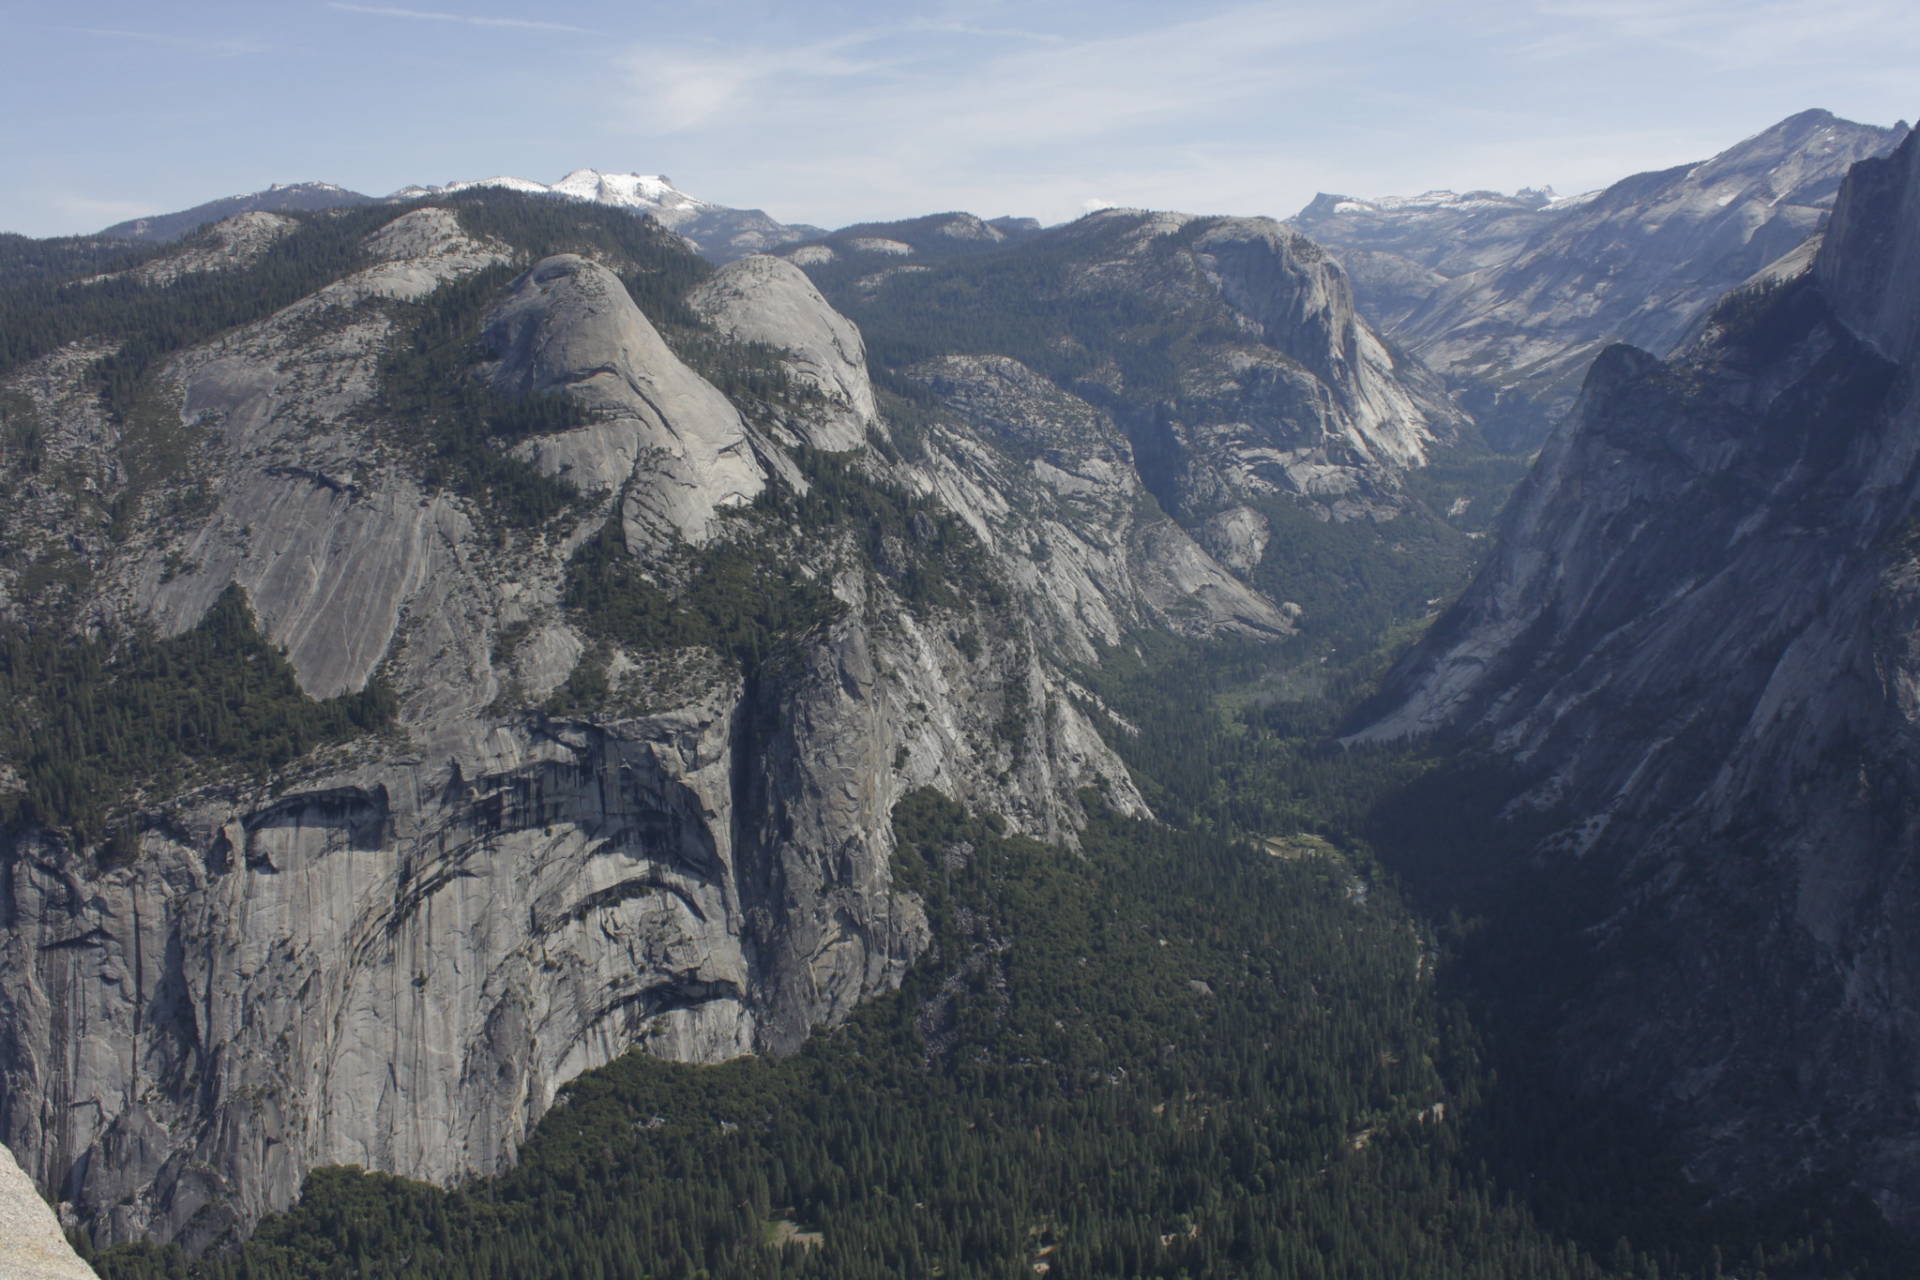 An aerial view of Yosemite National Park. Edward Stojakovic / Flickr